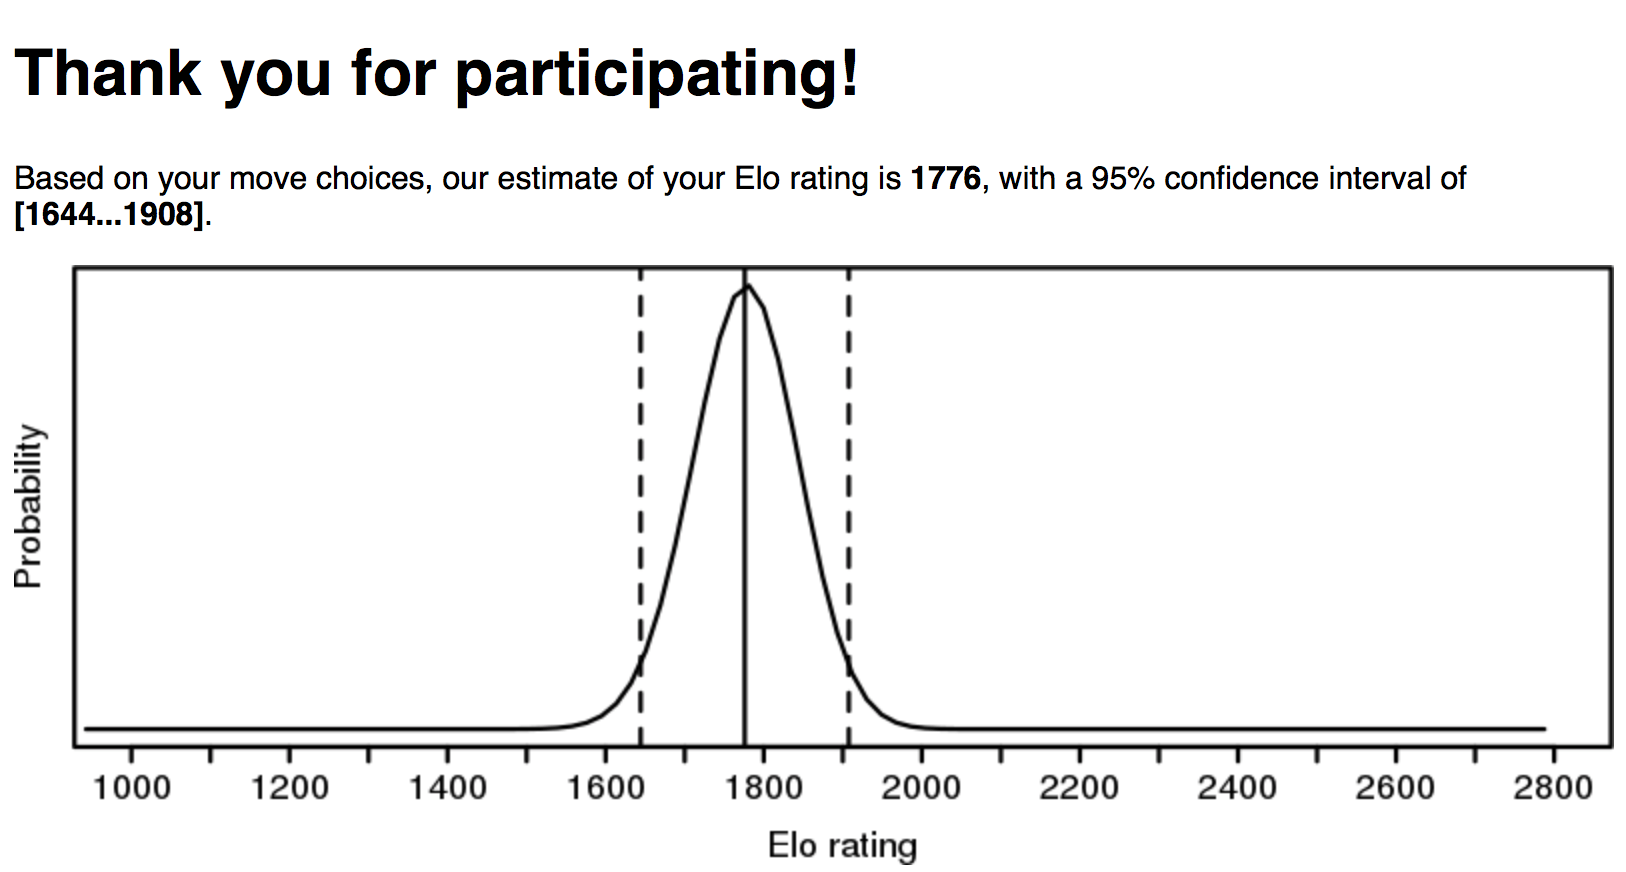 What percentage of chess players have an Elo rating above 1800 and